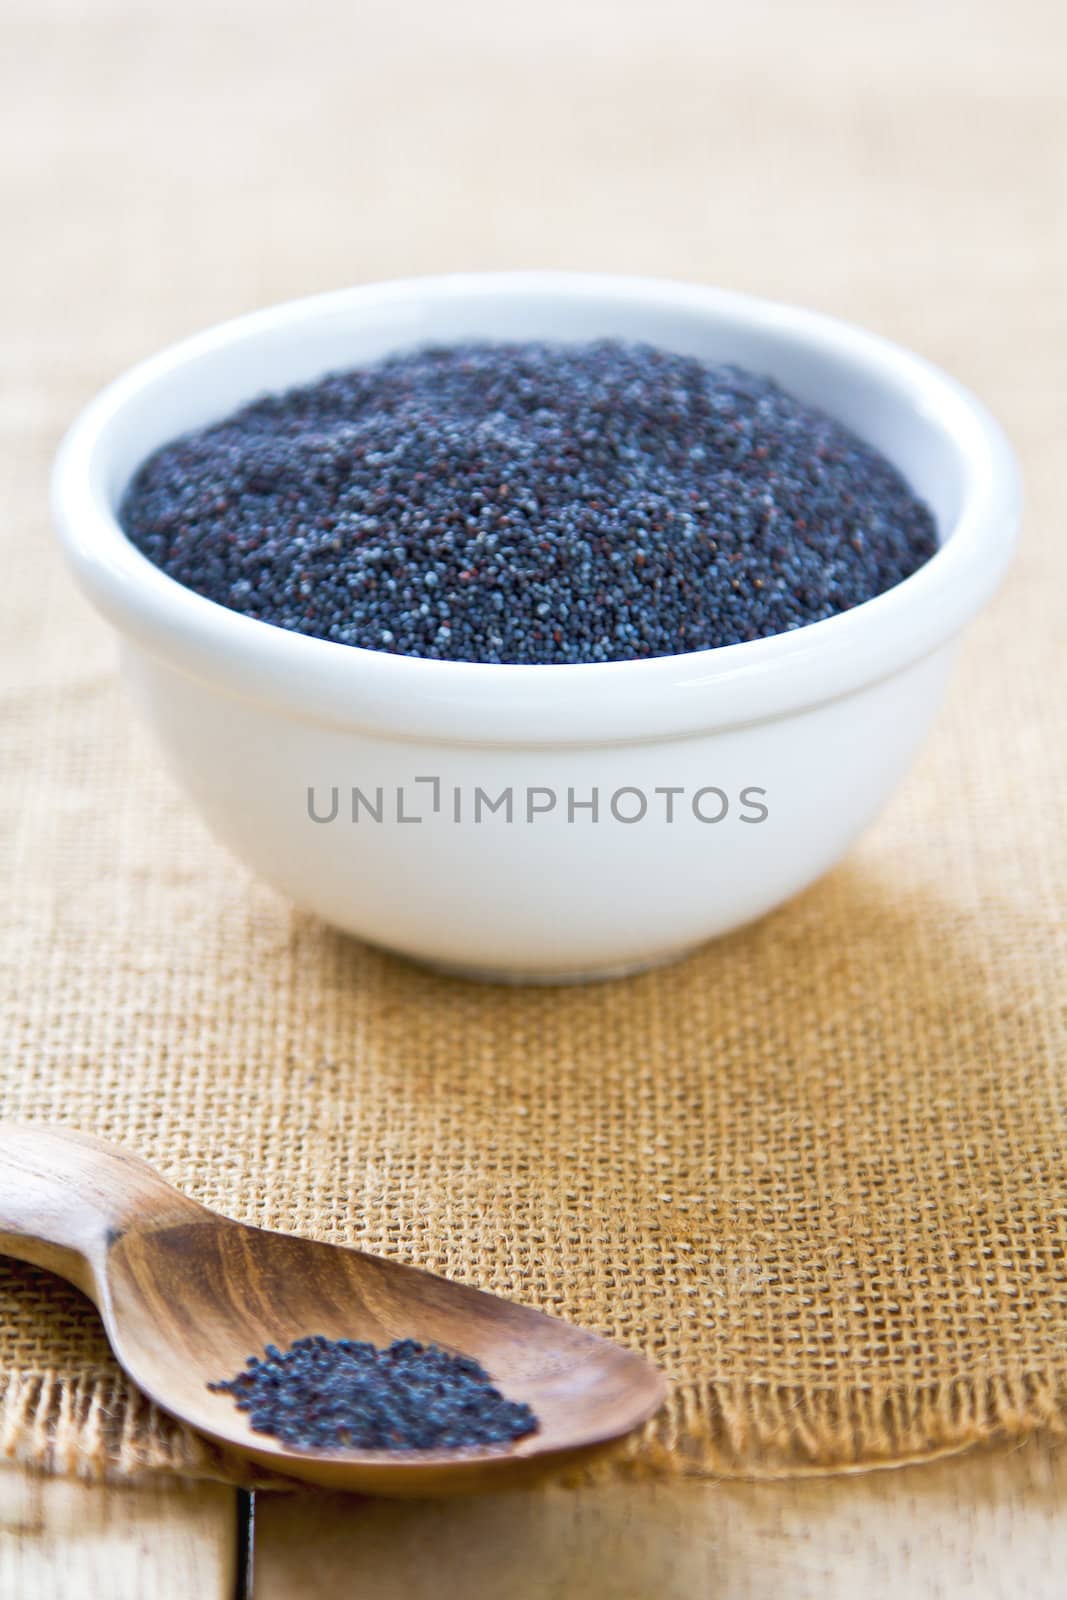 Blue seal Poppy seeds in a white bowl